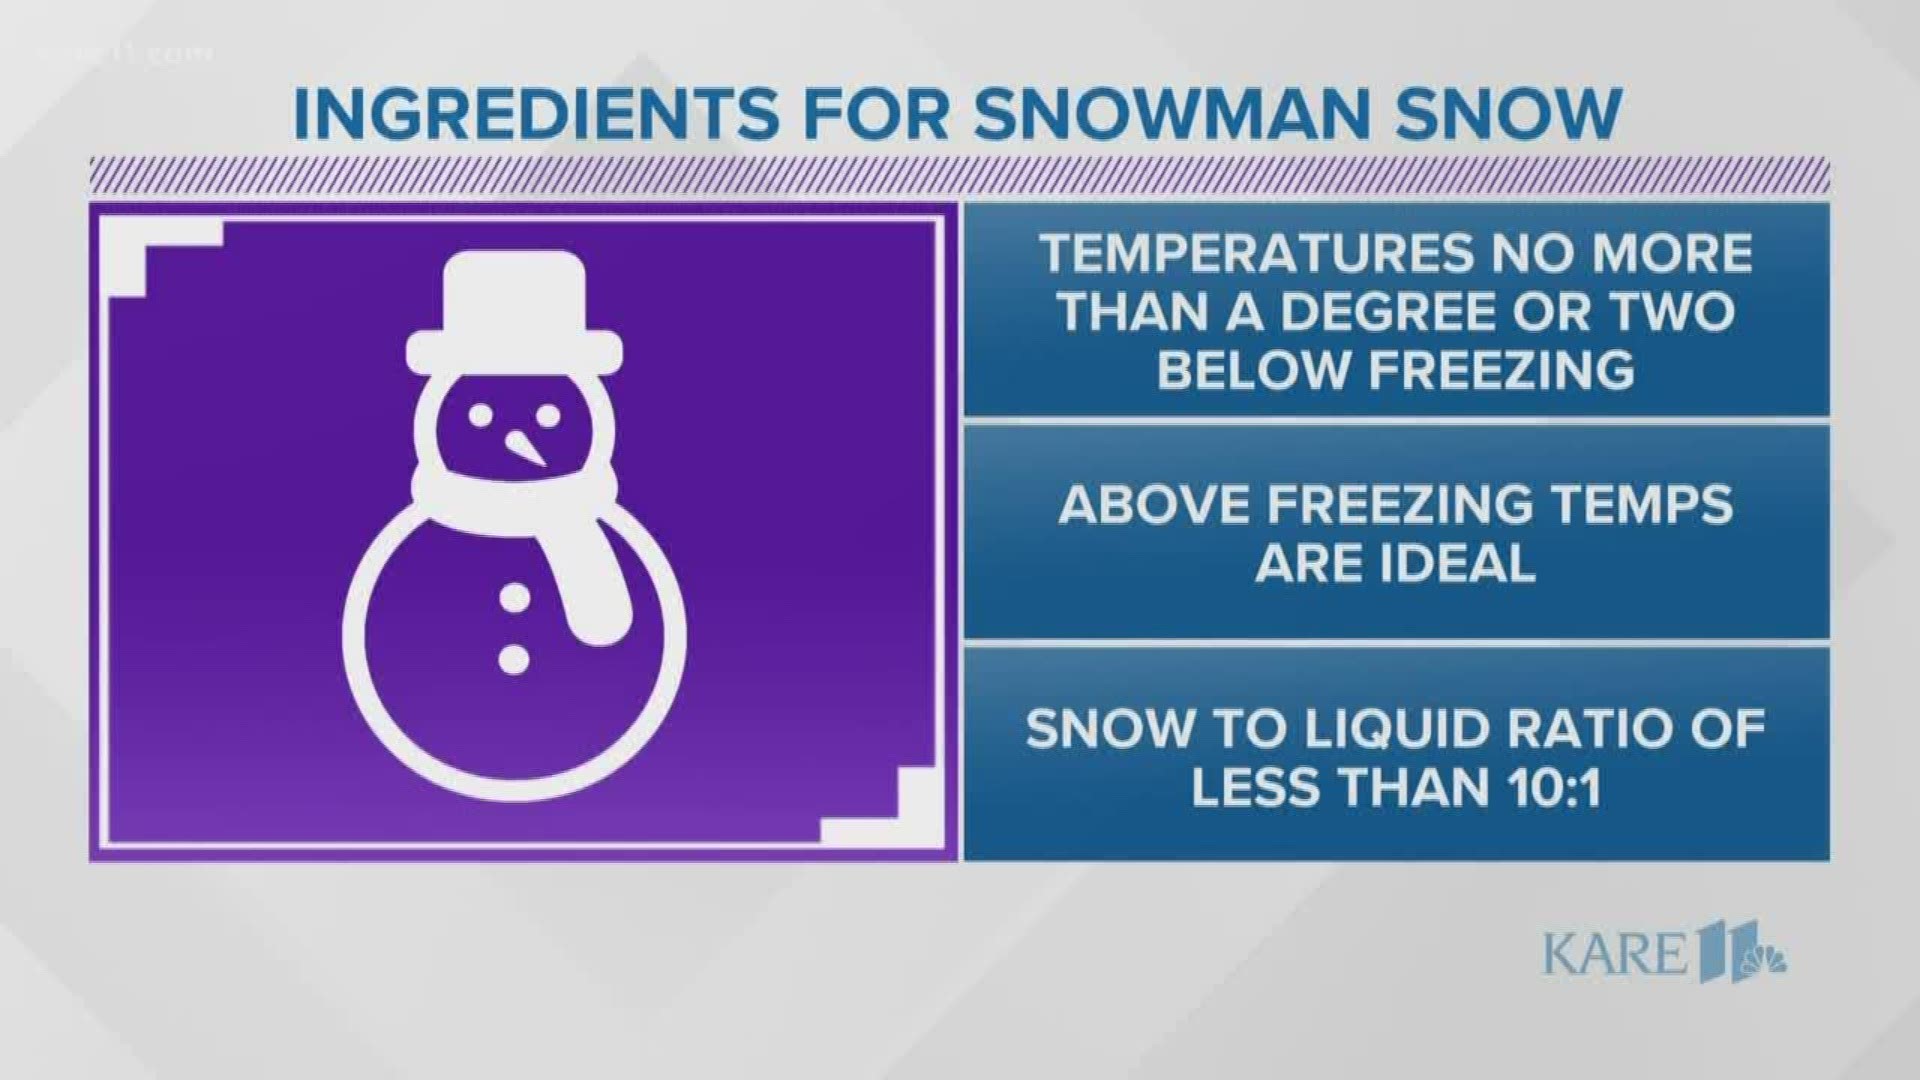 What are the ingredients of snowman snow? How about fluffy, dry snow? KARE 11 Meteorologist Laura Betker explains for WeatherMinds.